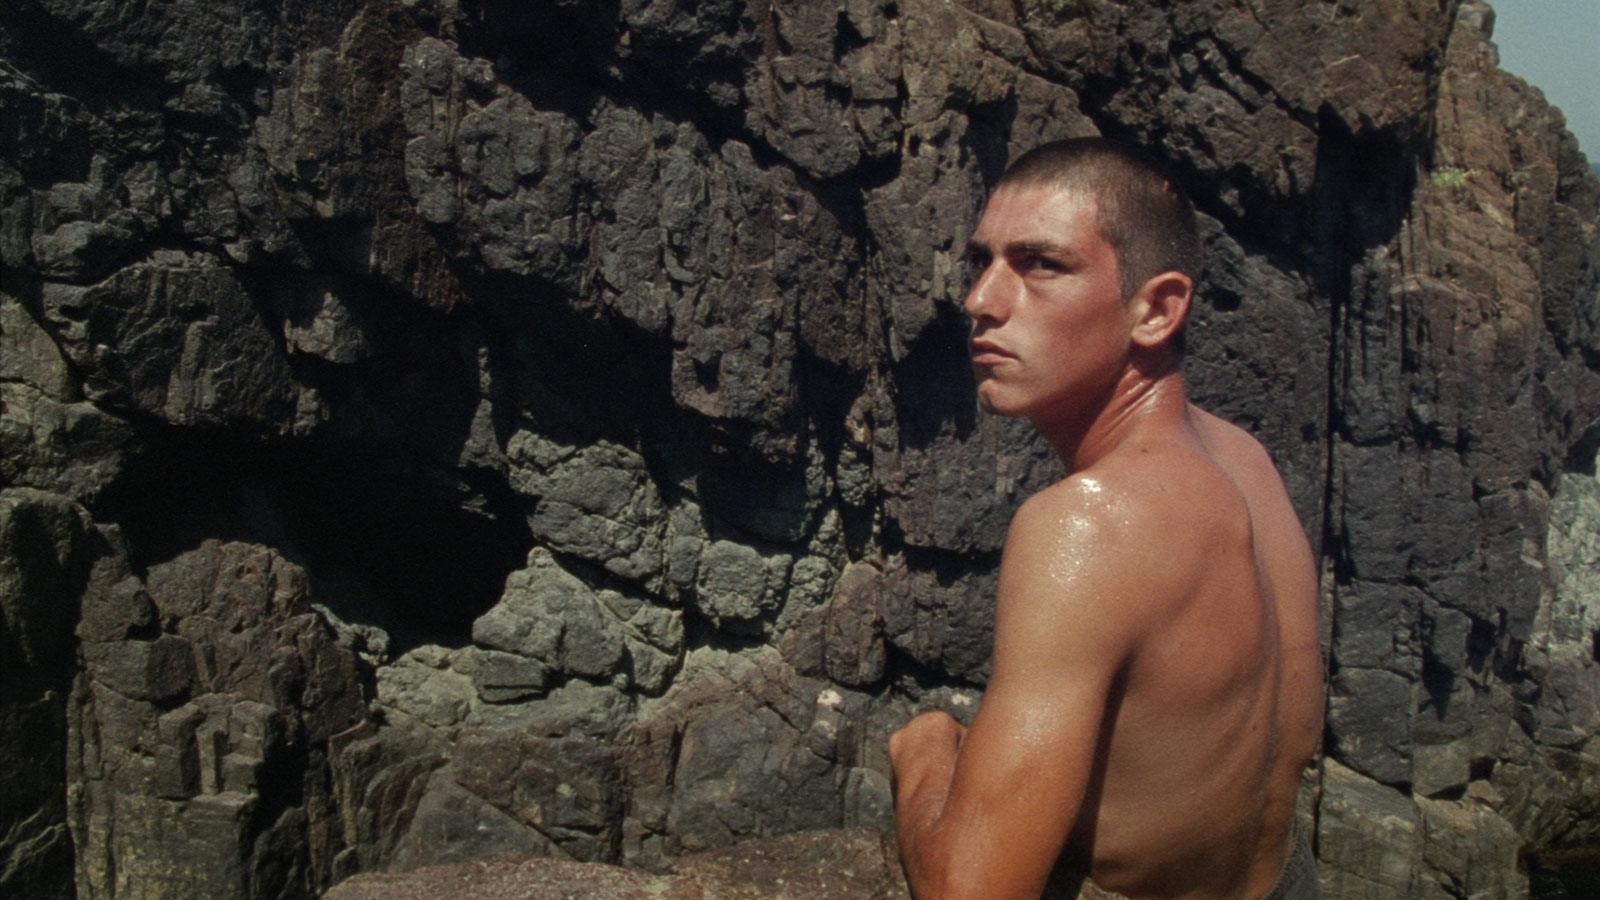 Man looking into the distance against backdrop of a rocky wall